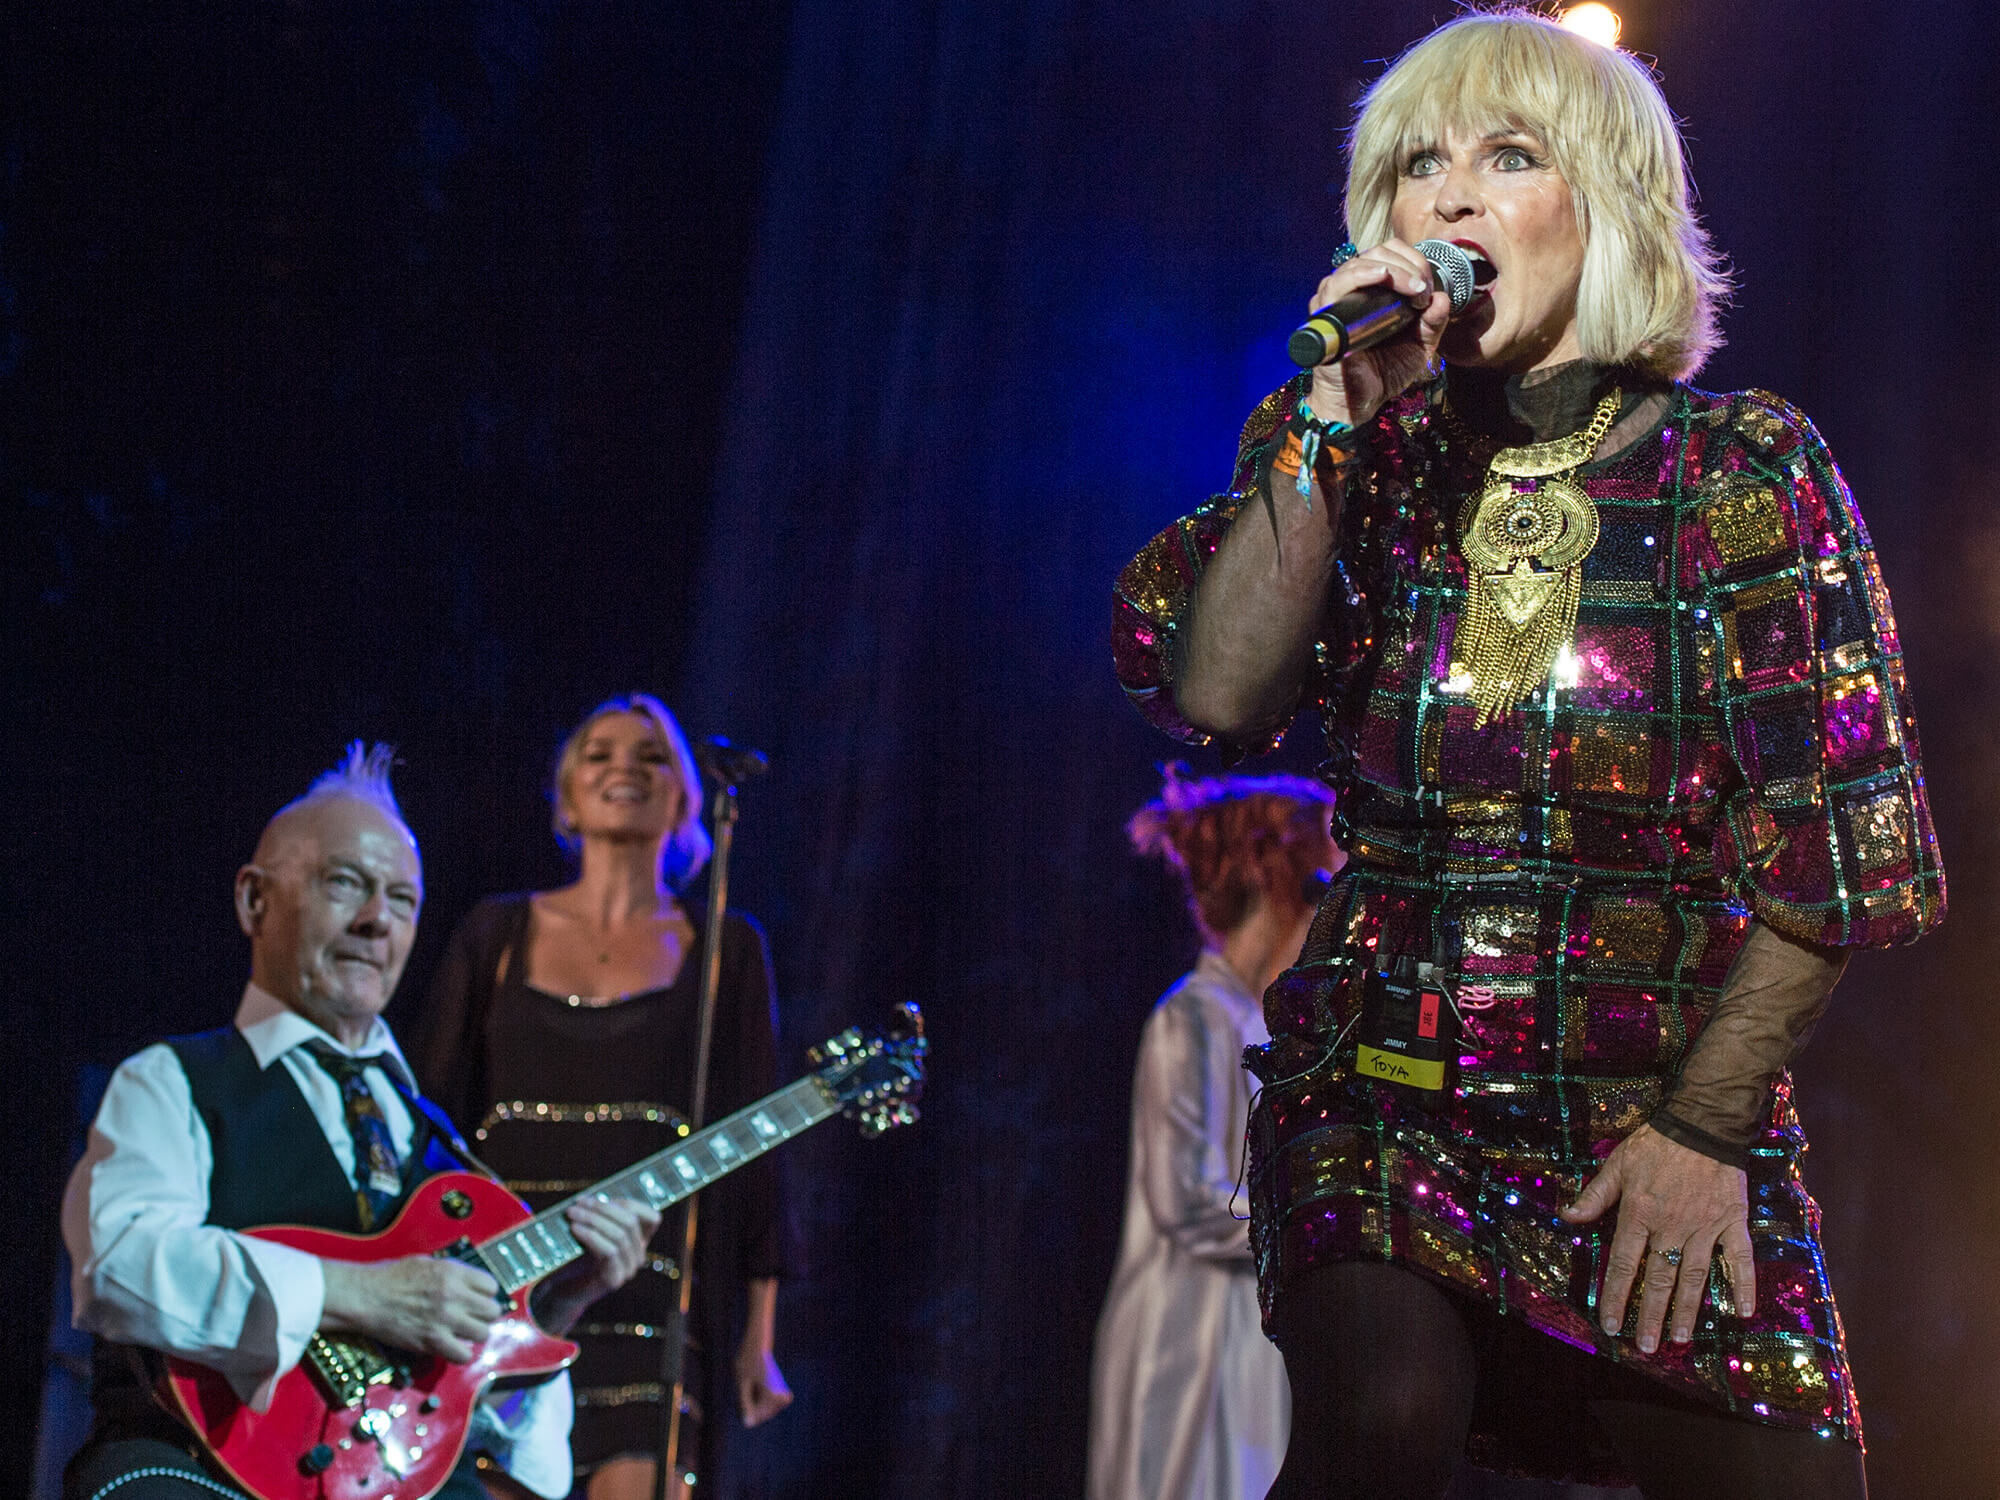 Toyah and Robert on stage. Robert is sat playing guitar whilst Toyah sings into a microphone wearing a sparkling dress.